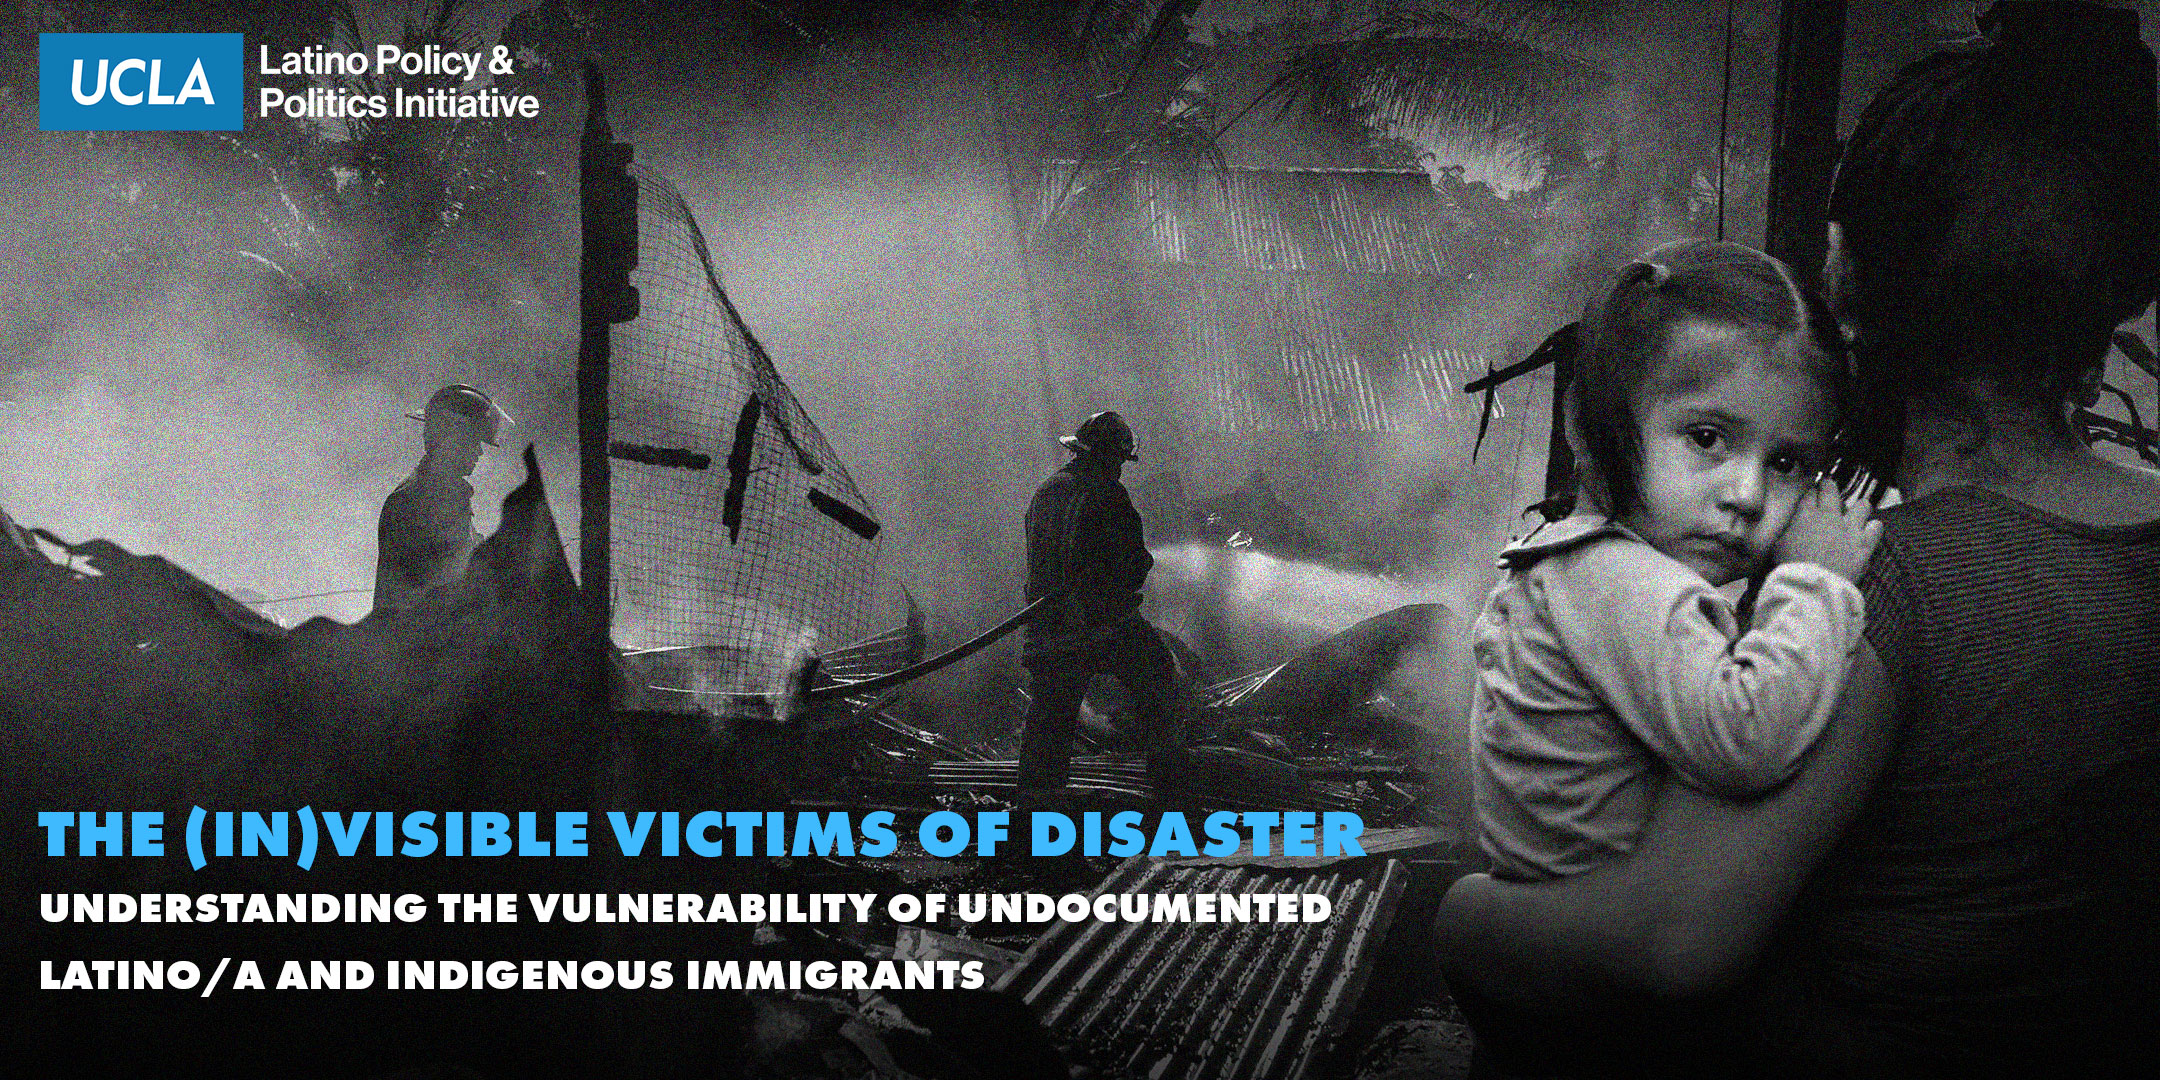 The (In)visible Victims of Disaster